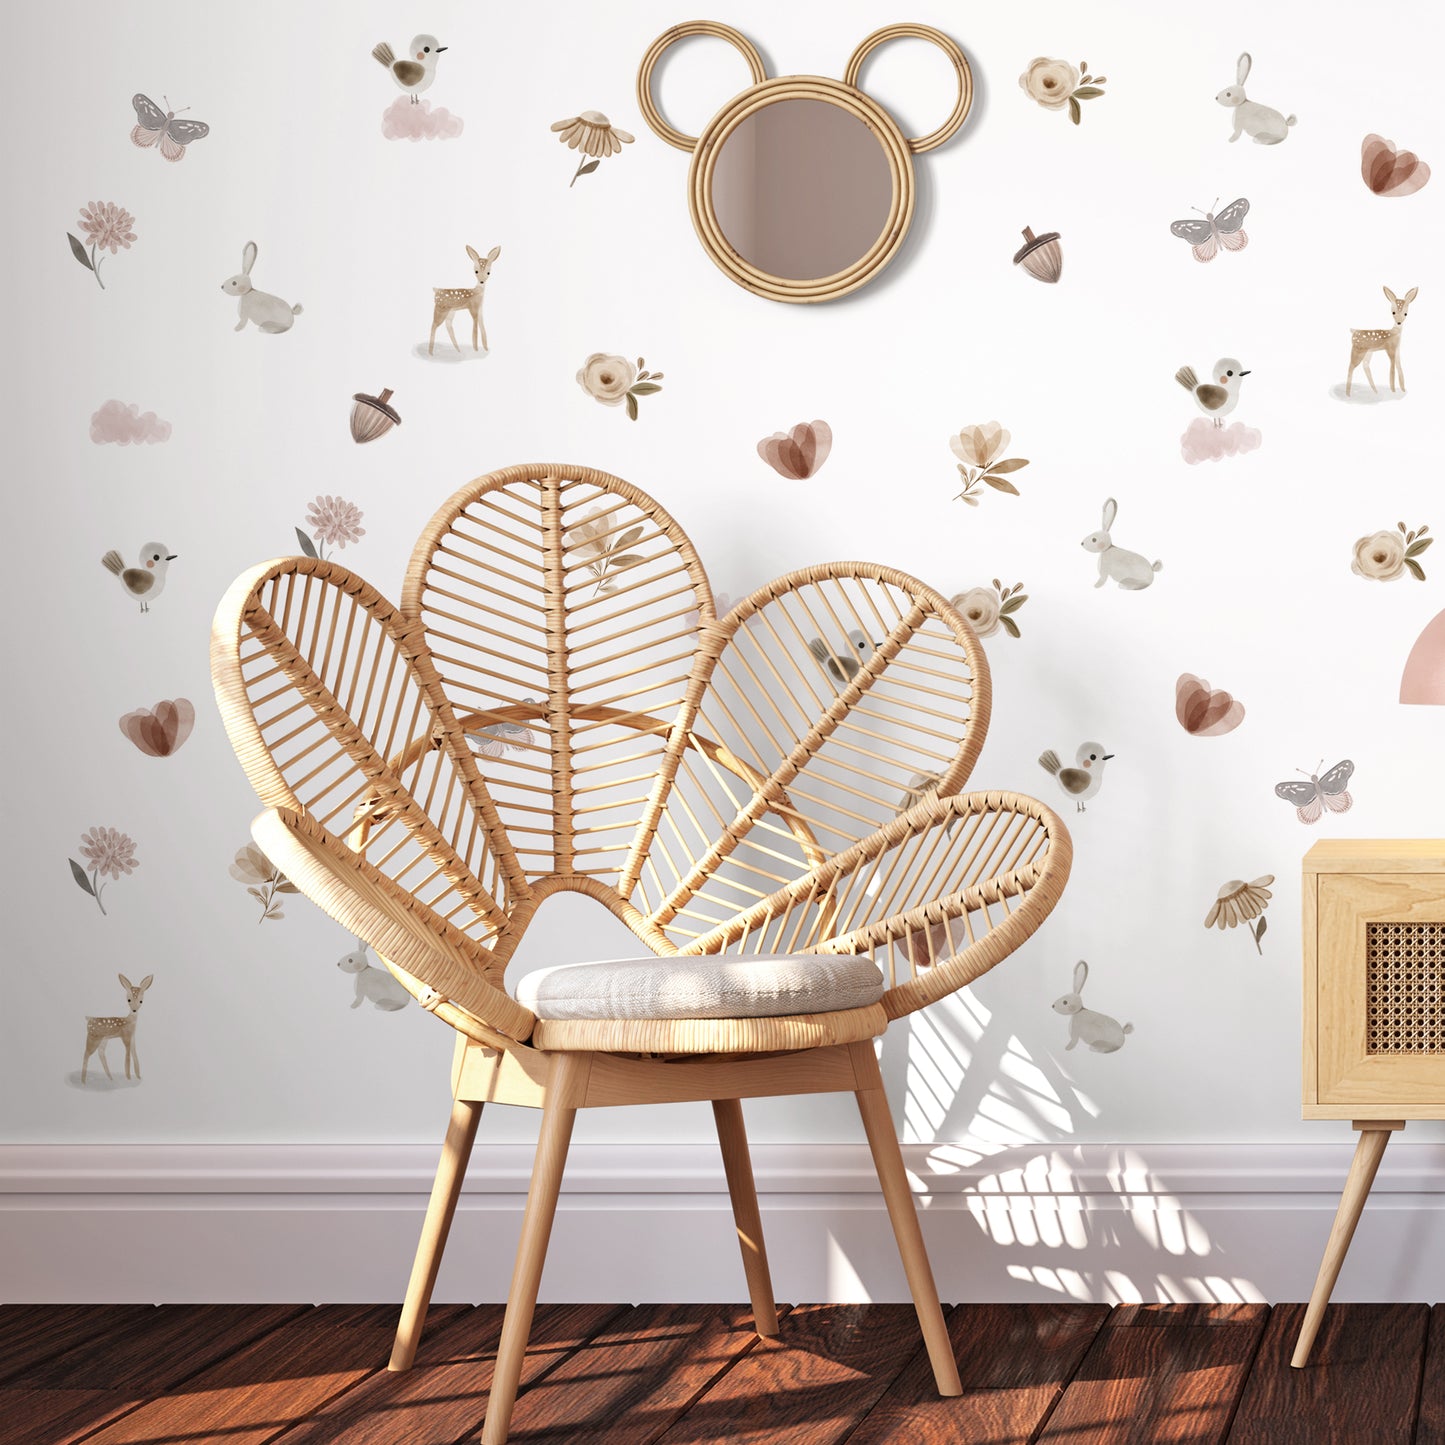 Woodland Wall Decals - Wall Decals - Fable and Fawn 